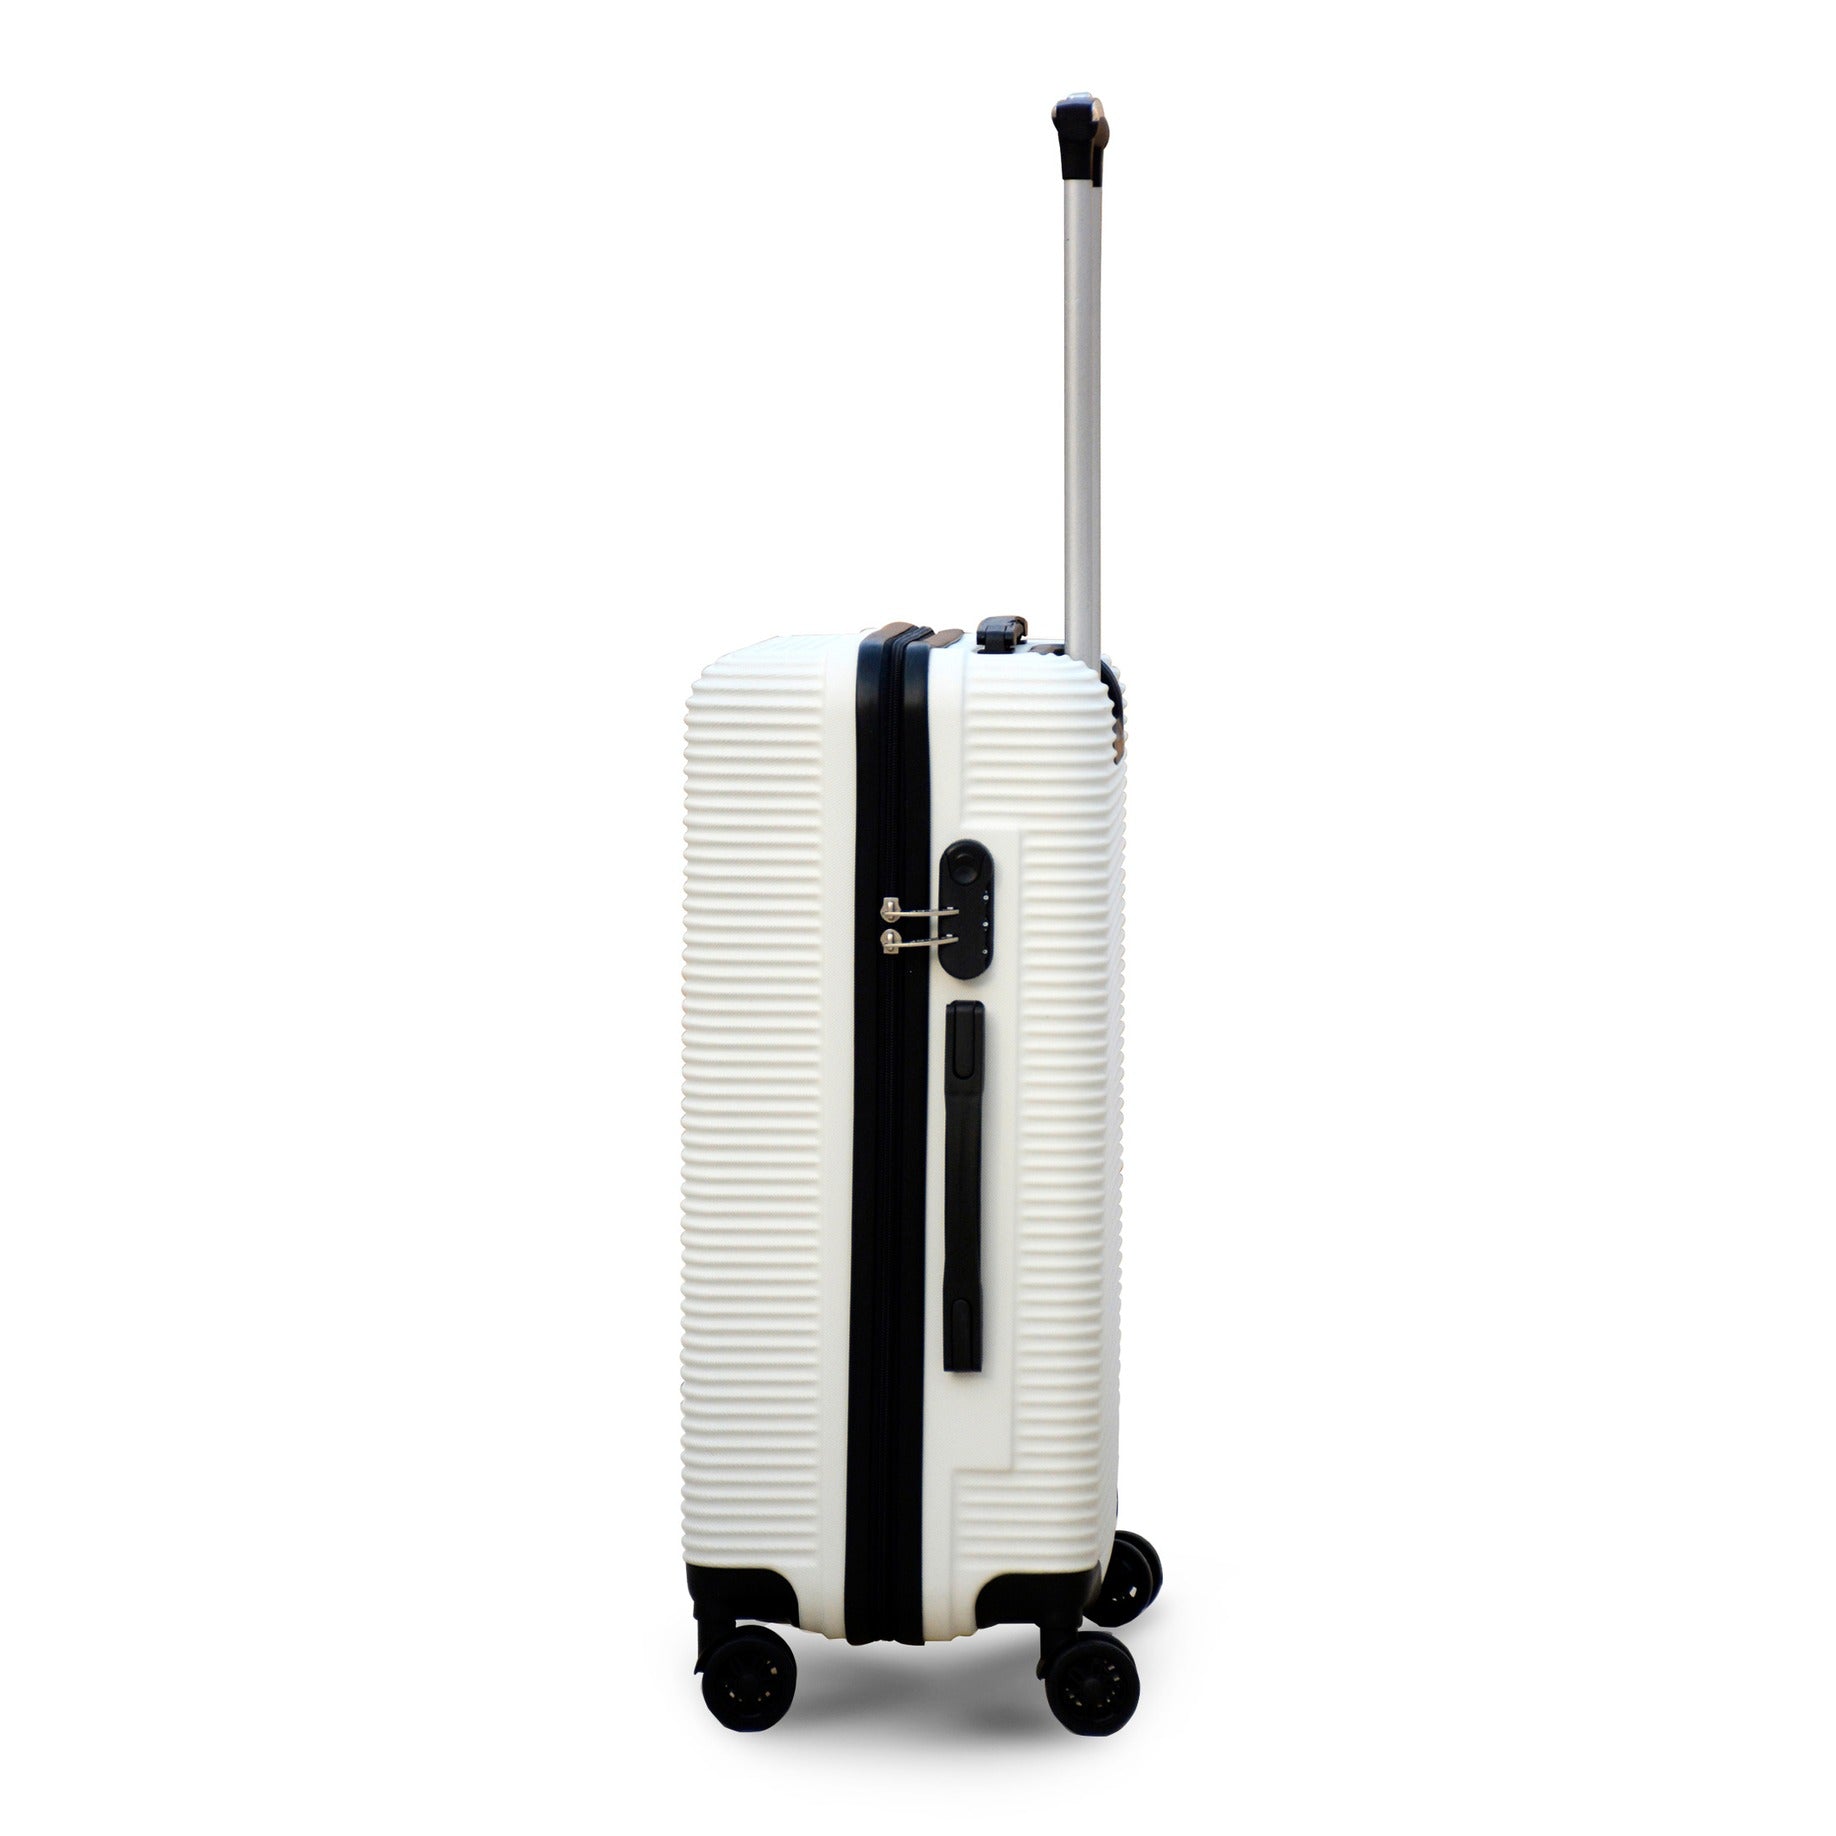 20" White Colour JIAN ABS Line Luggage Lightweight Hard Case Carry On Trolley Bag With Spinner Wheel